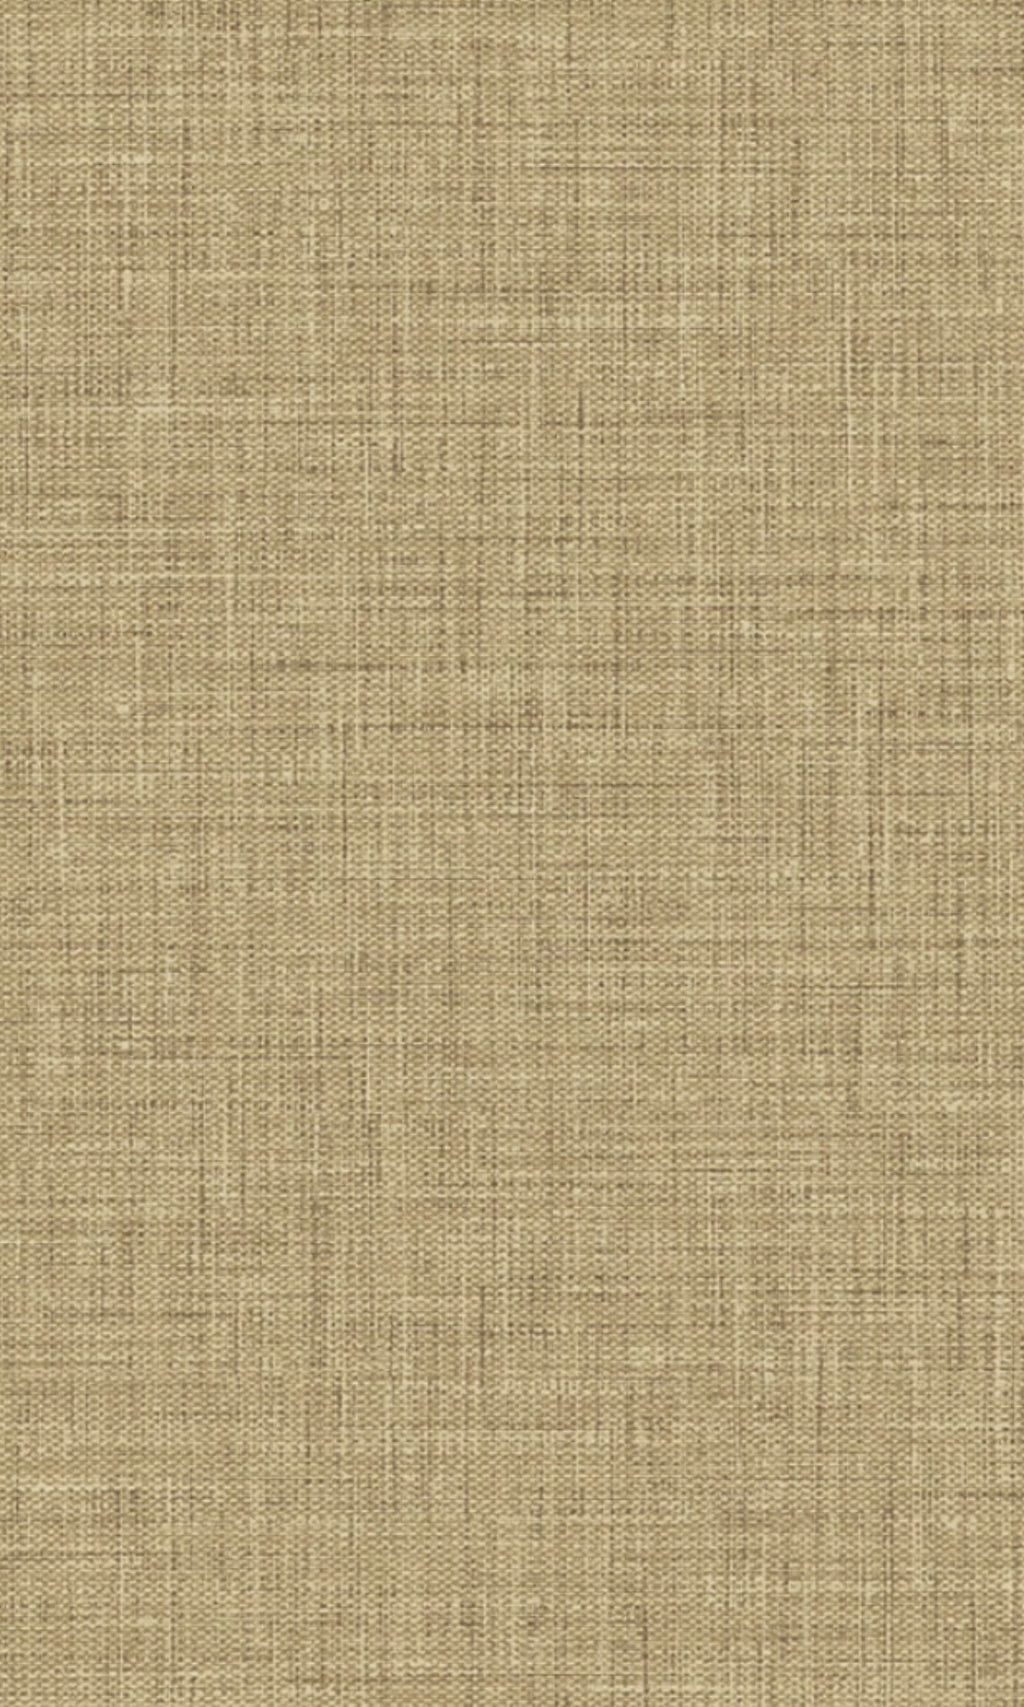 Driftwood Fabric Like Textured Vinyl Commercial CPW1051